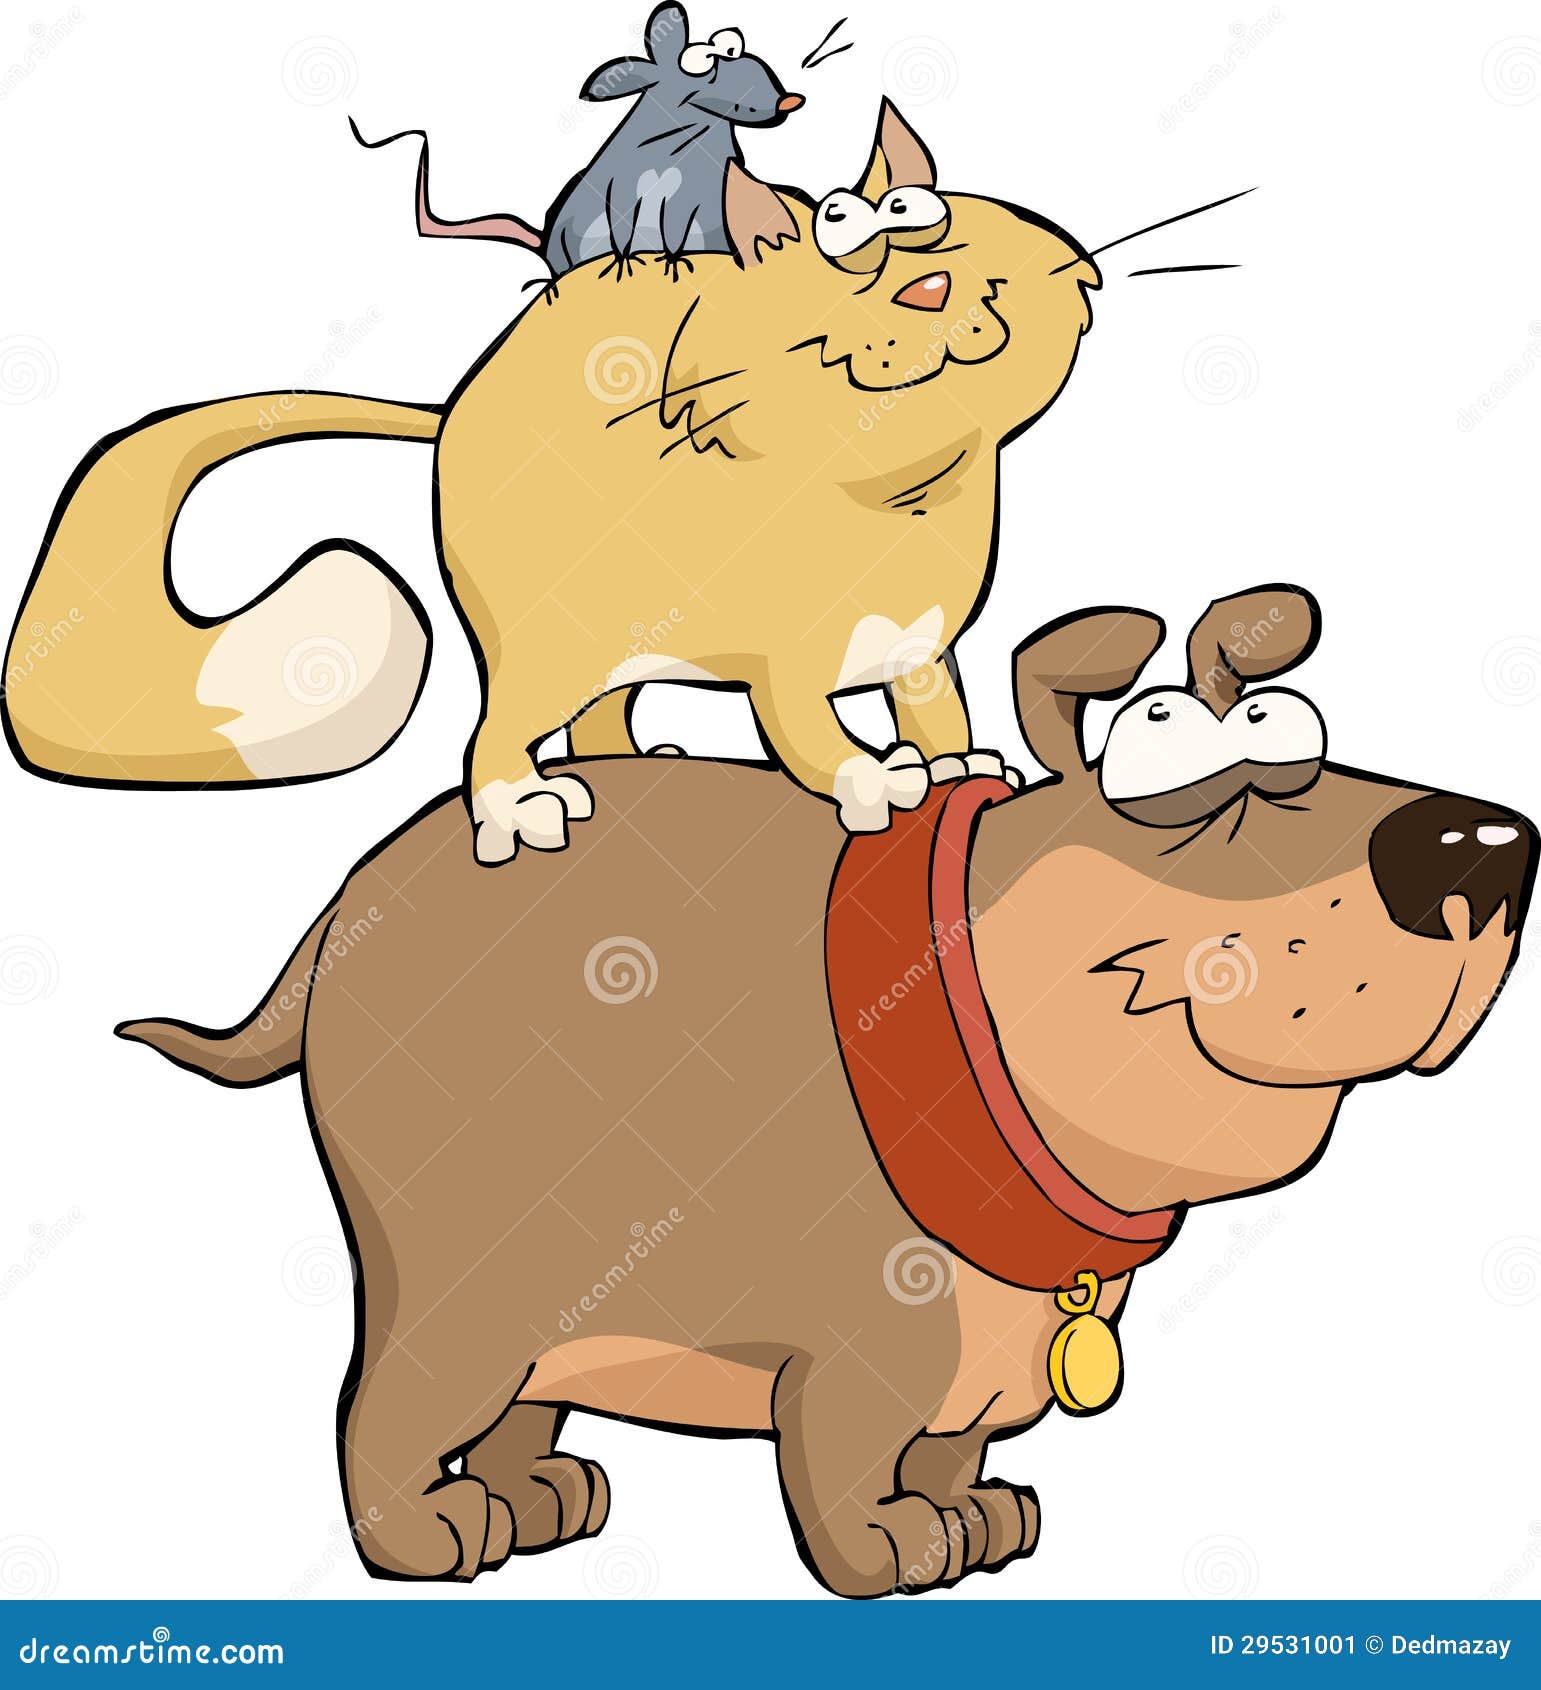 Dog Cat And Mouse Stock Image - Image: 29531001